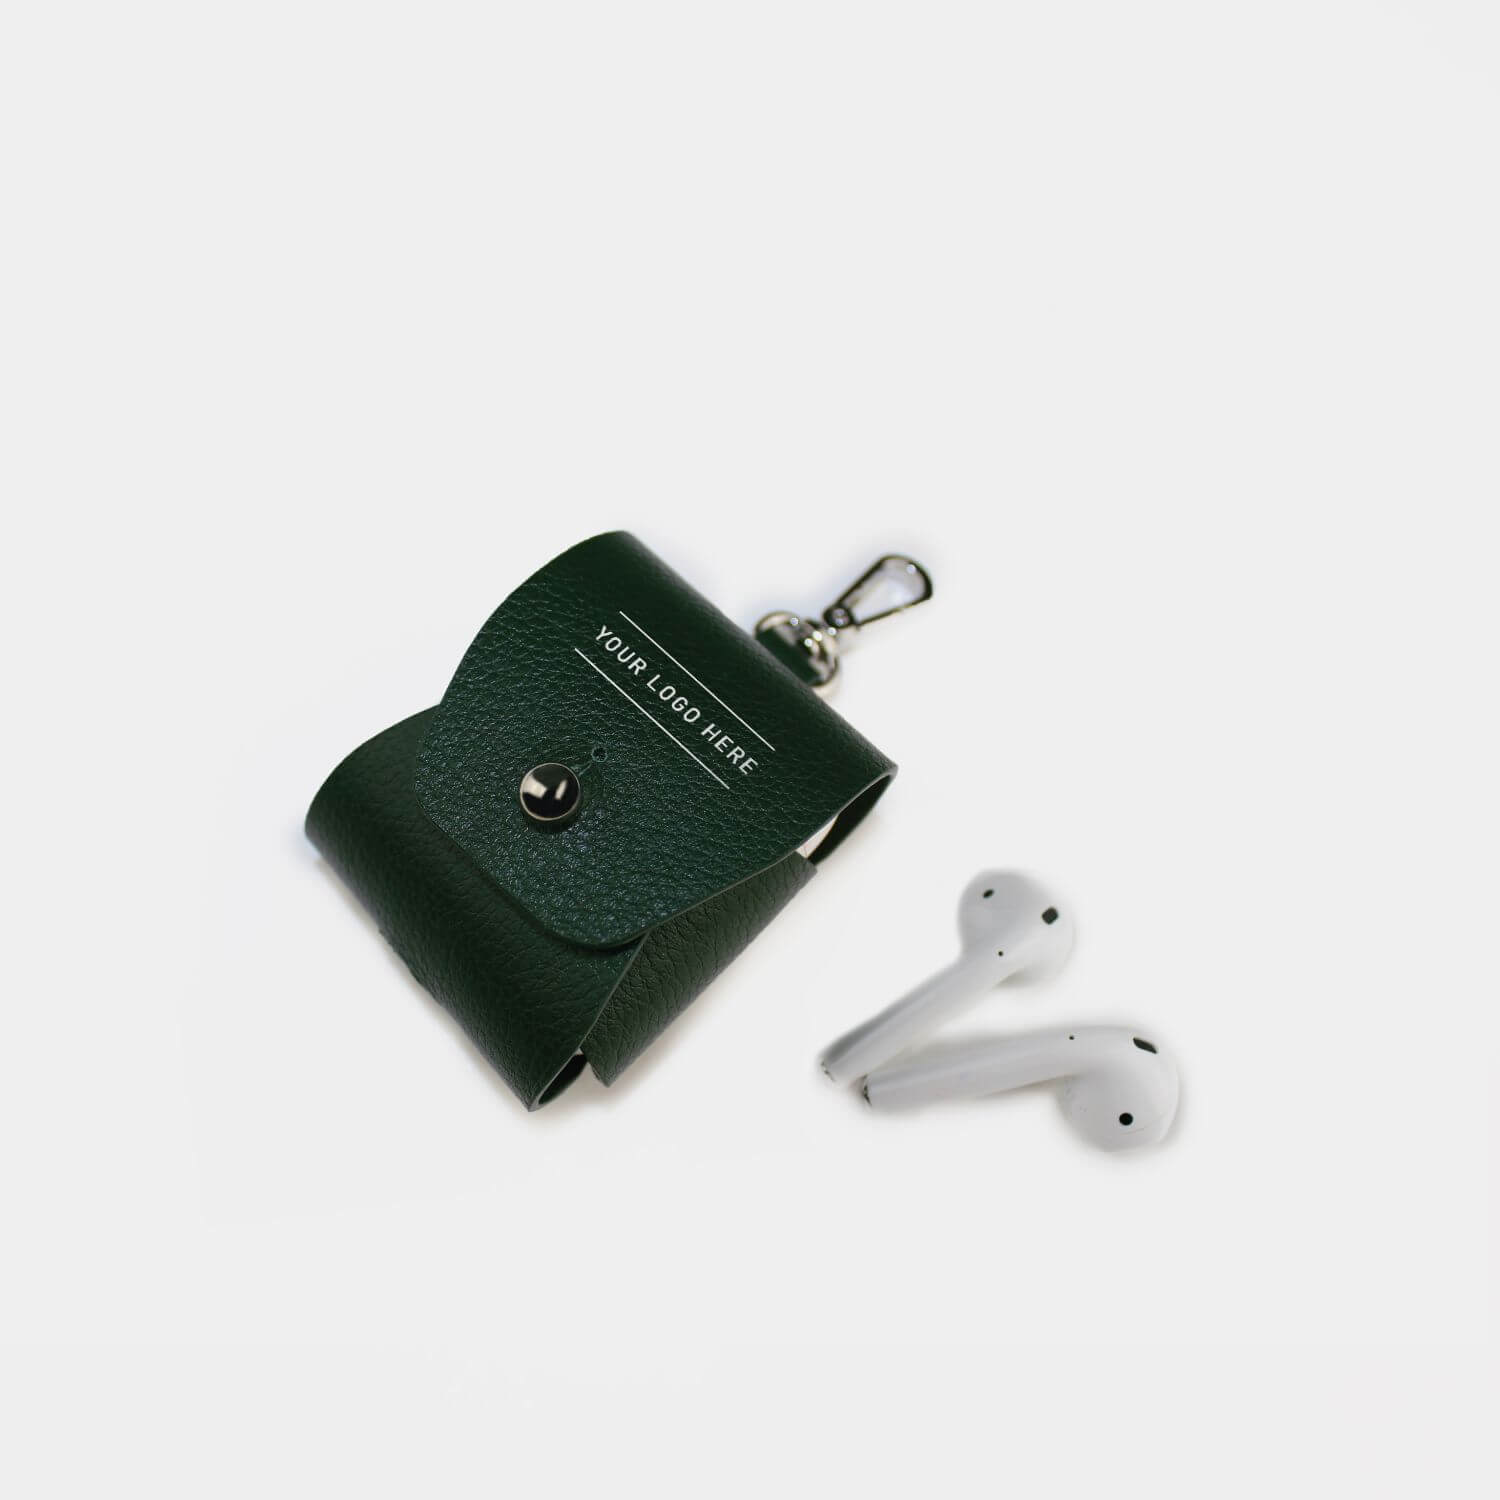 Fine grain leather airpod and airpod pro pouch with clip to secure onto bag, branded with your company logo